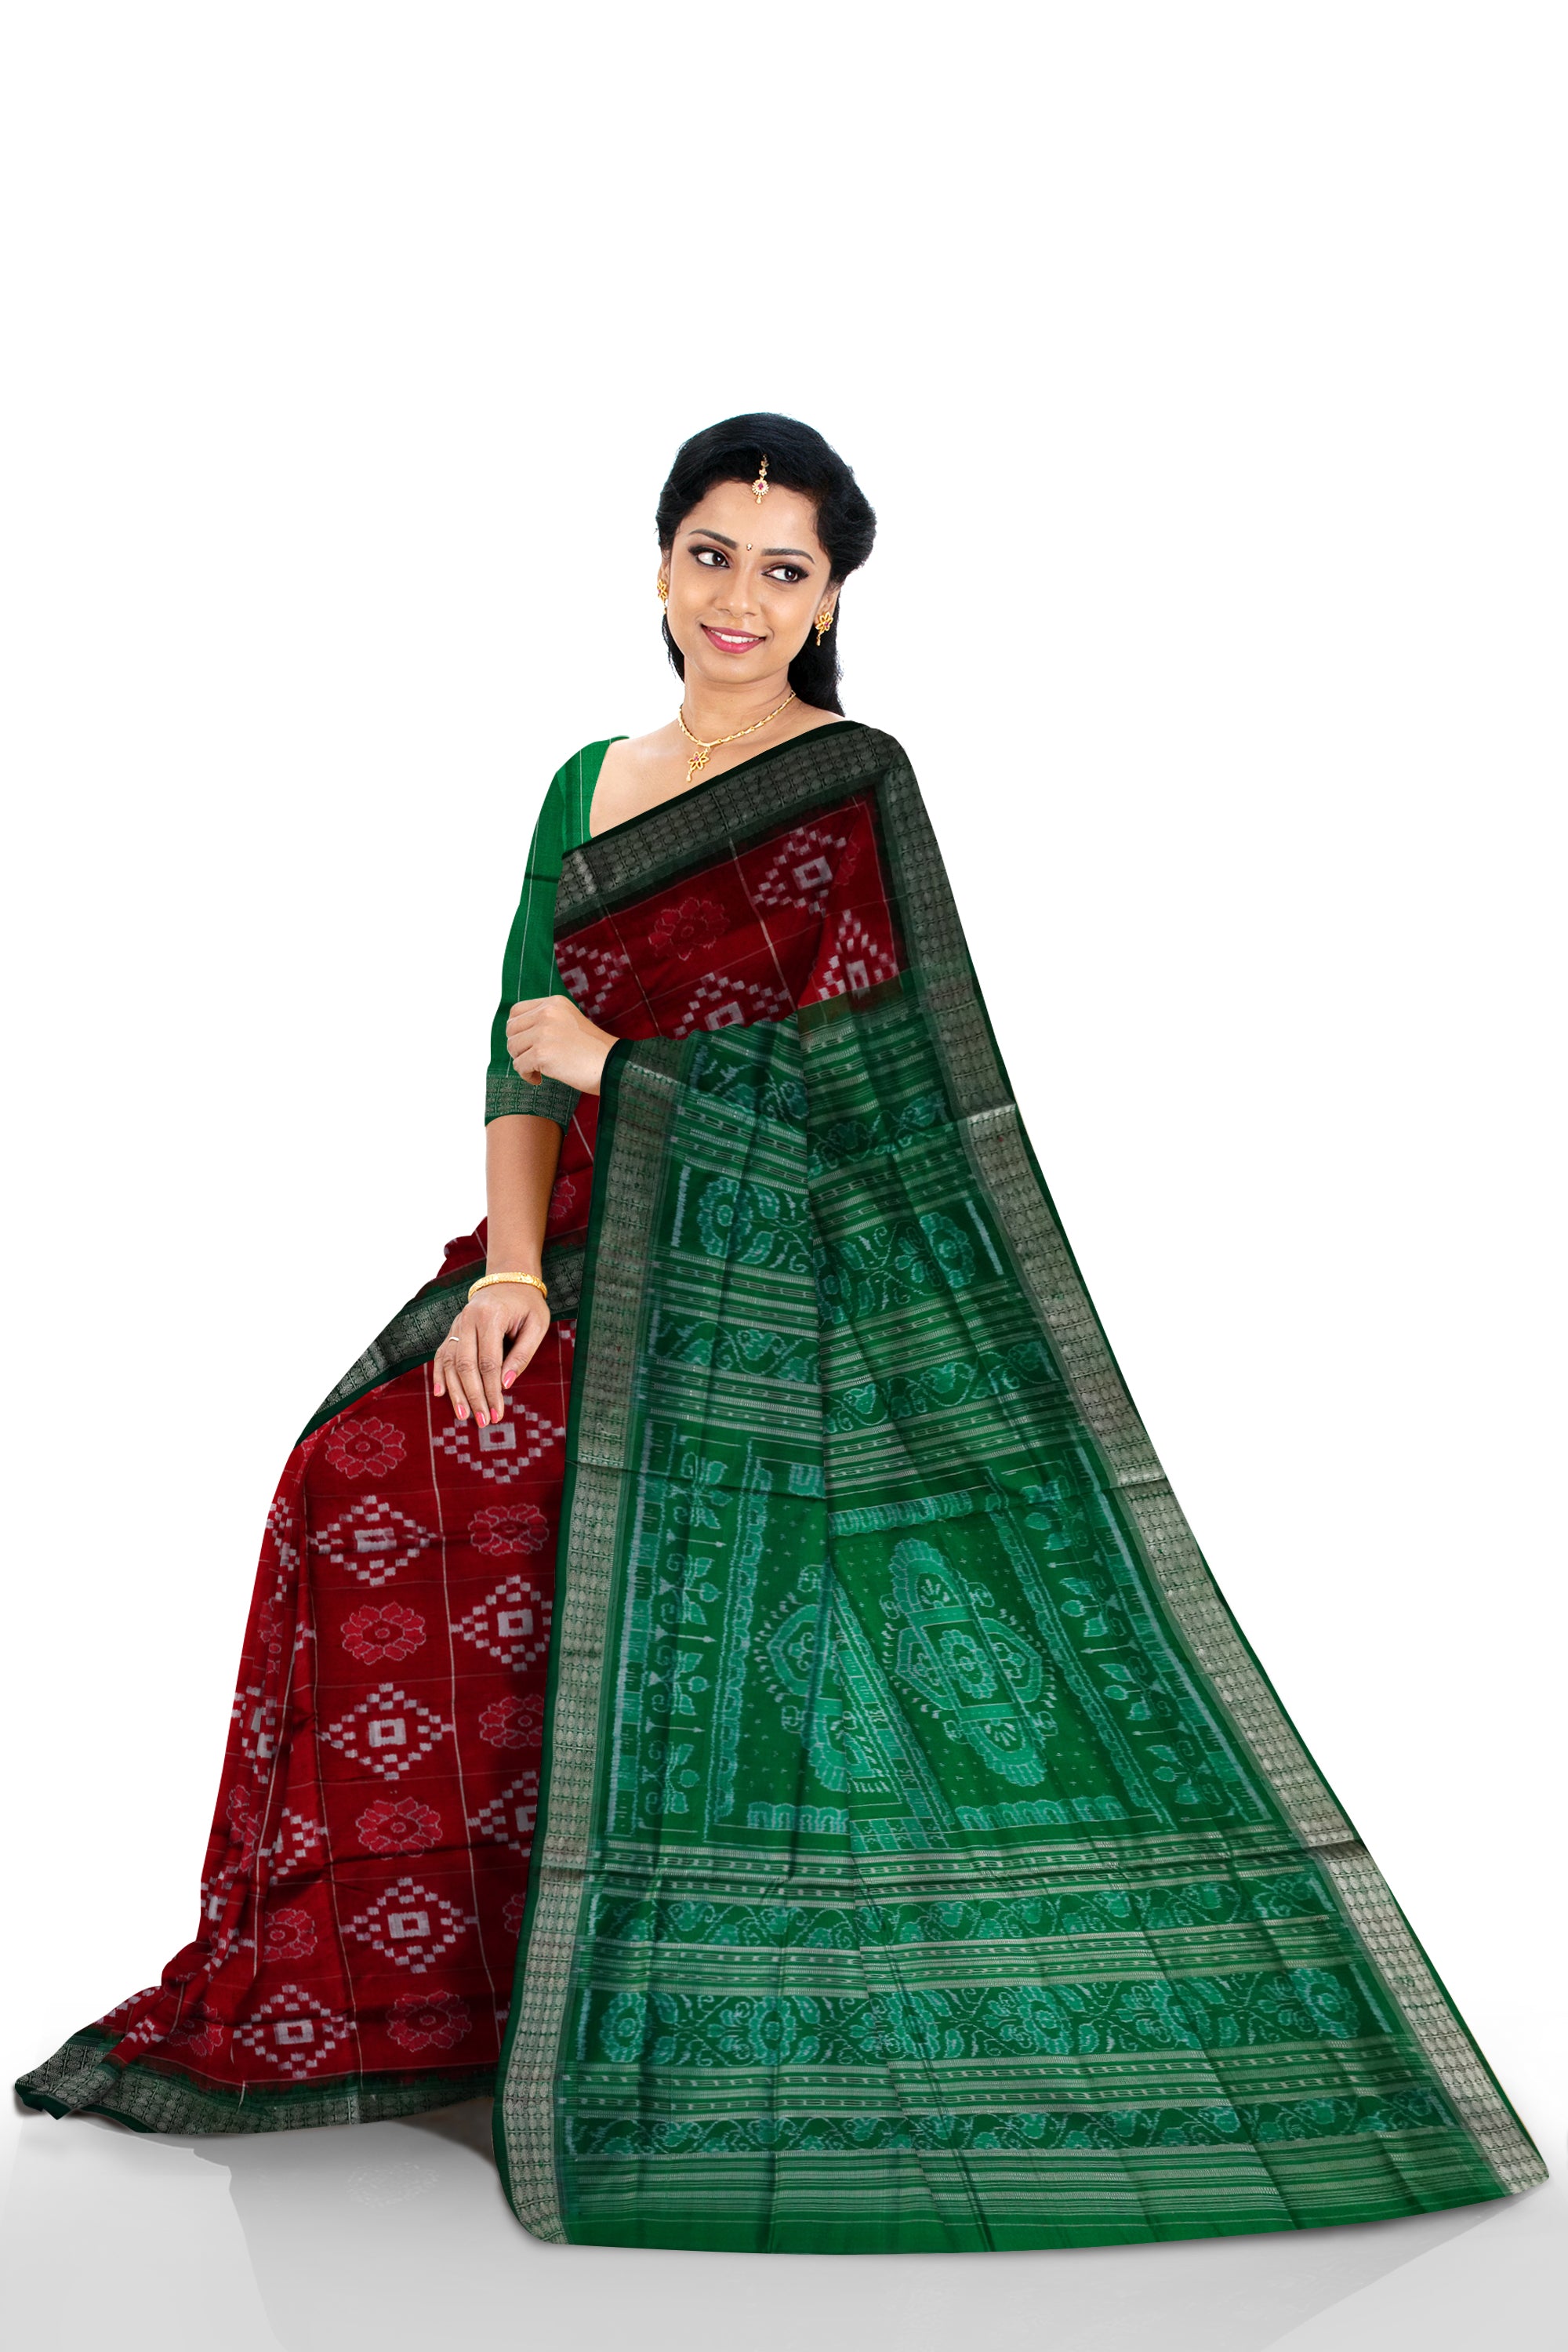 Flowers and Pasapali design in boxes pattern Pure silk pata saree in Maroon and Green color. - Koshali Arts & Crafts Enterprise